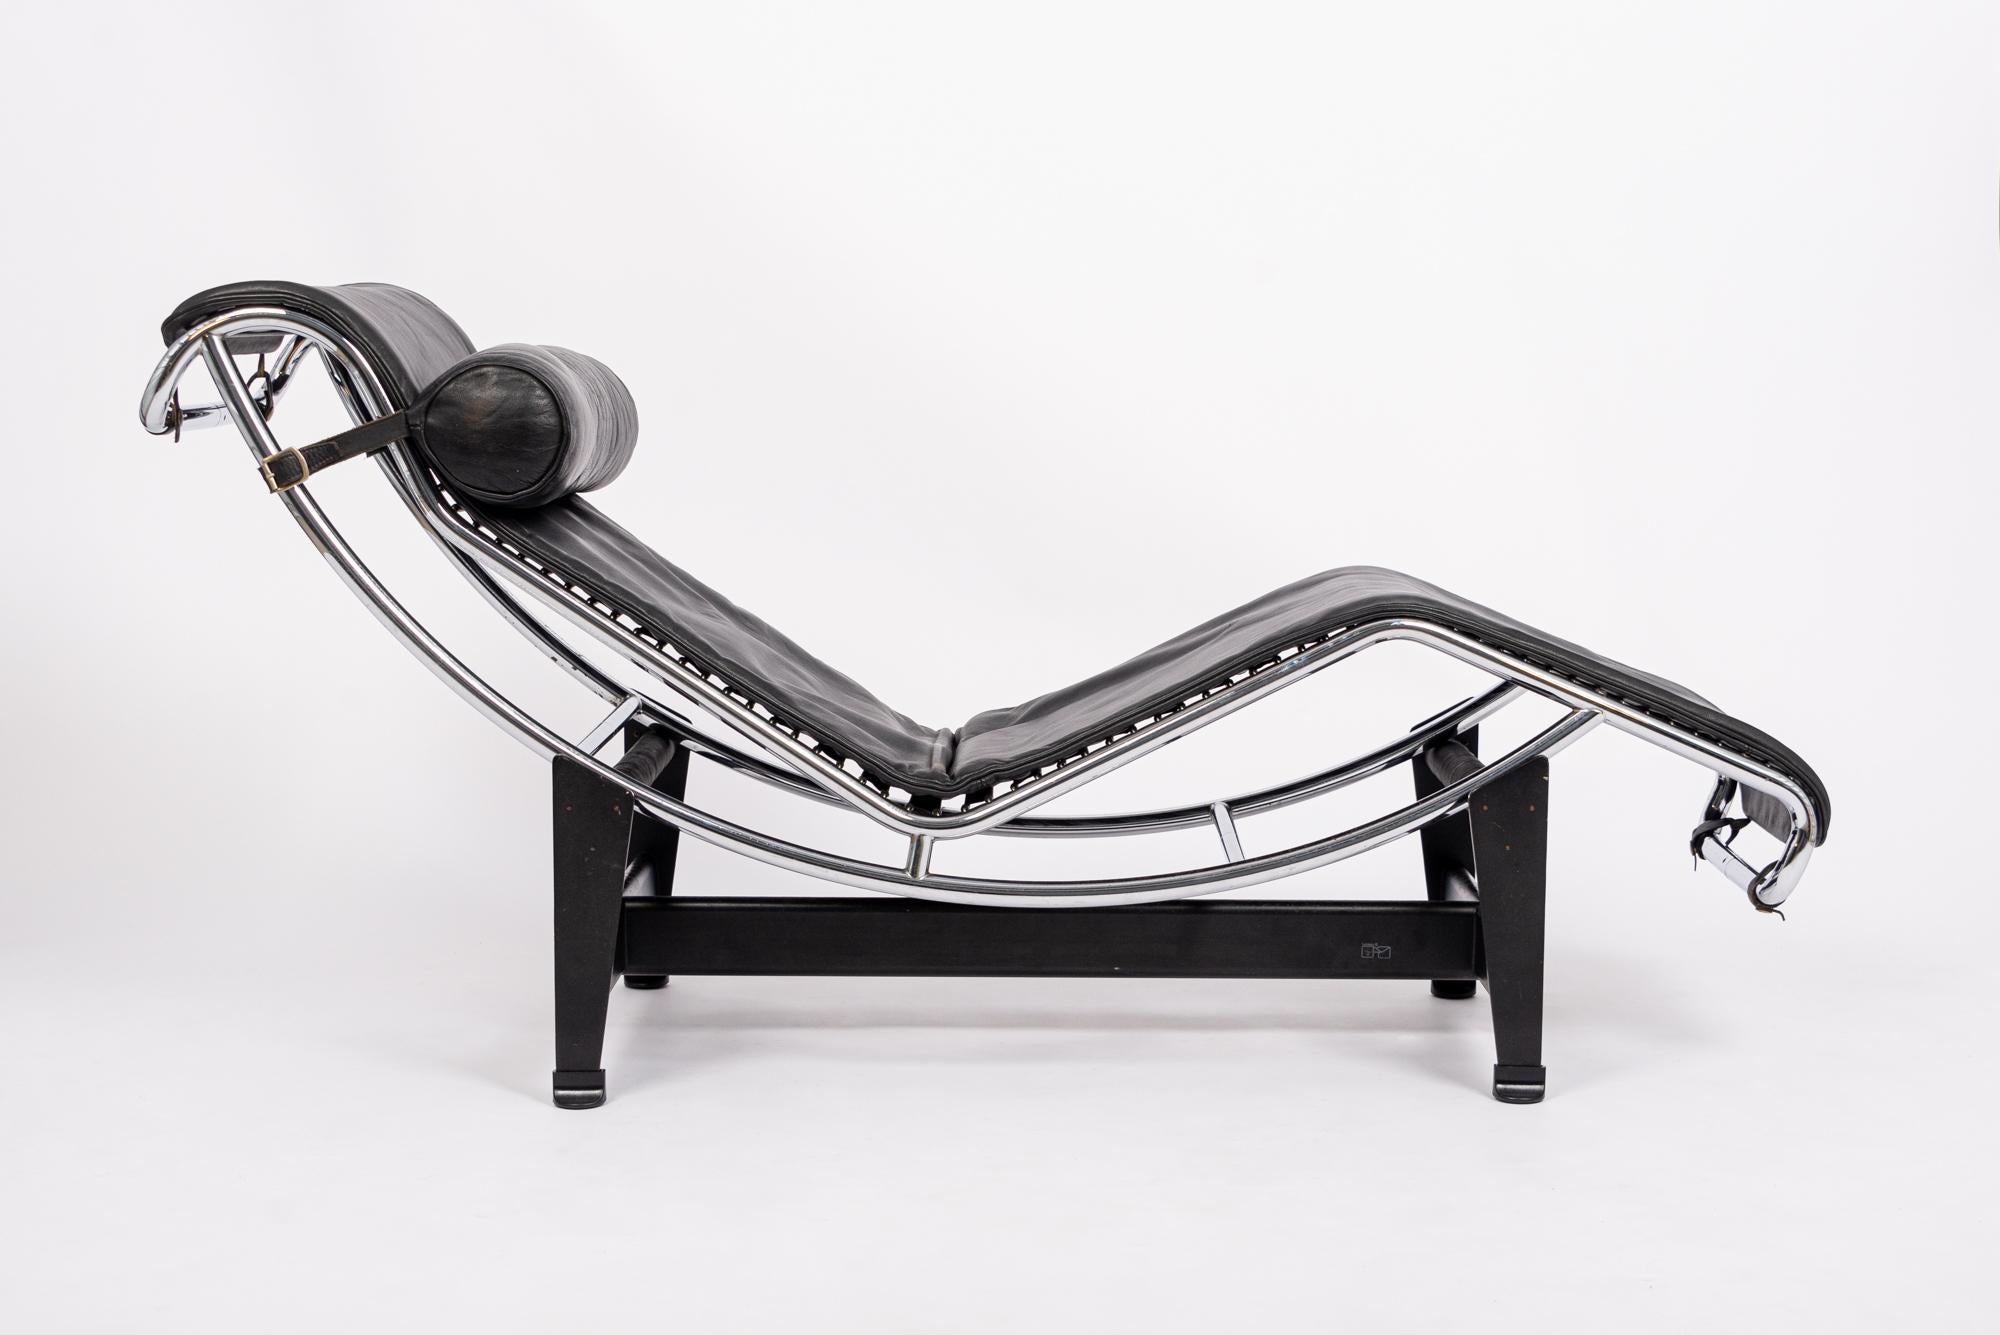 The LC4 is a Bauhaus classic and is included in the permanent collection of the Museum of Modern Art in New York. Each piece is signed, numbered and manufactured by Cassina under exclusive worldwide license from the Le Corbusier Foundation. This